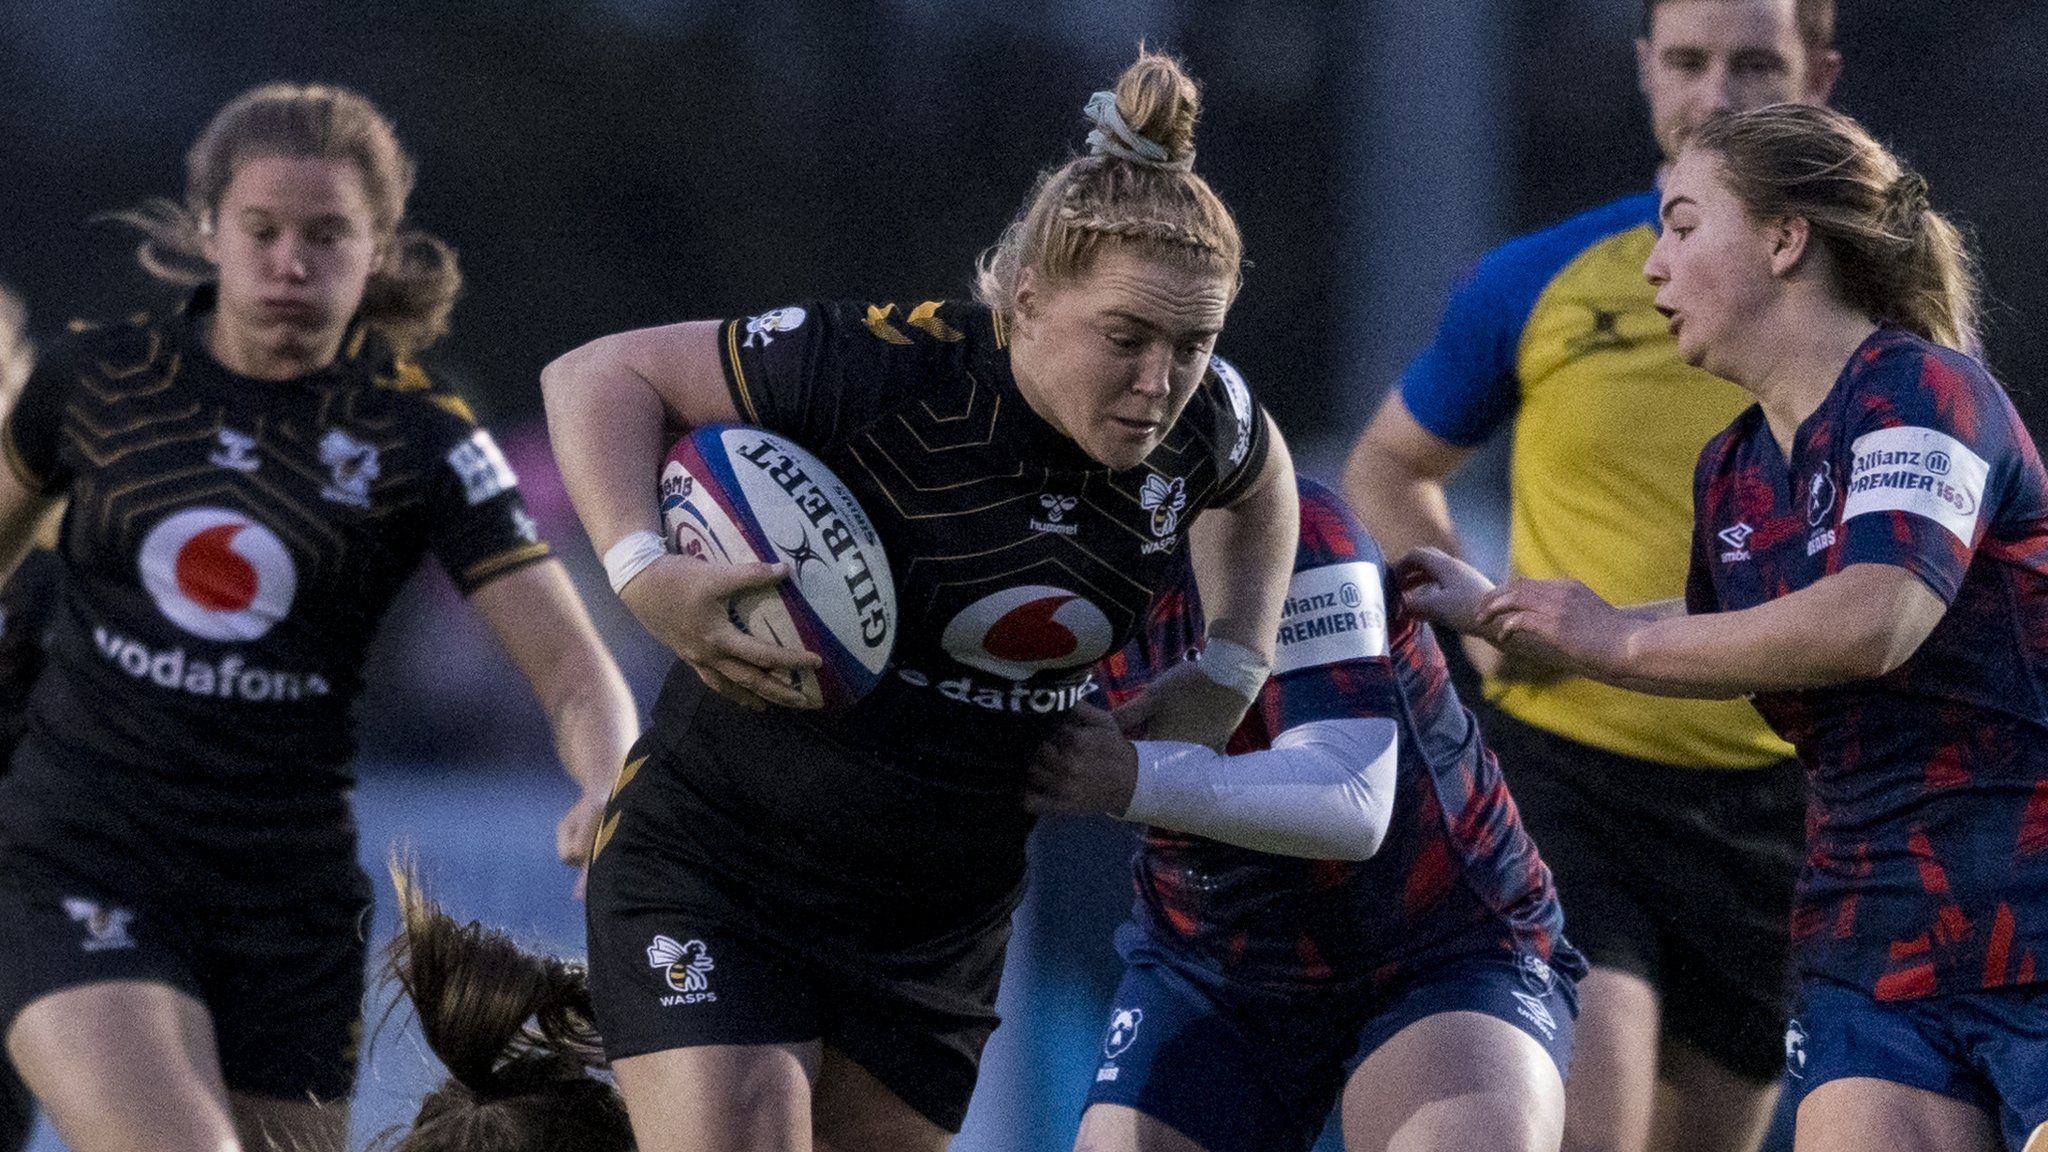 Cliodhna Moloney made the club switch from Wasps to Exeter Chiefs in the summer of 2022